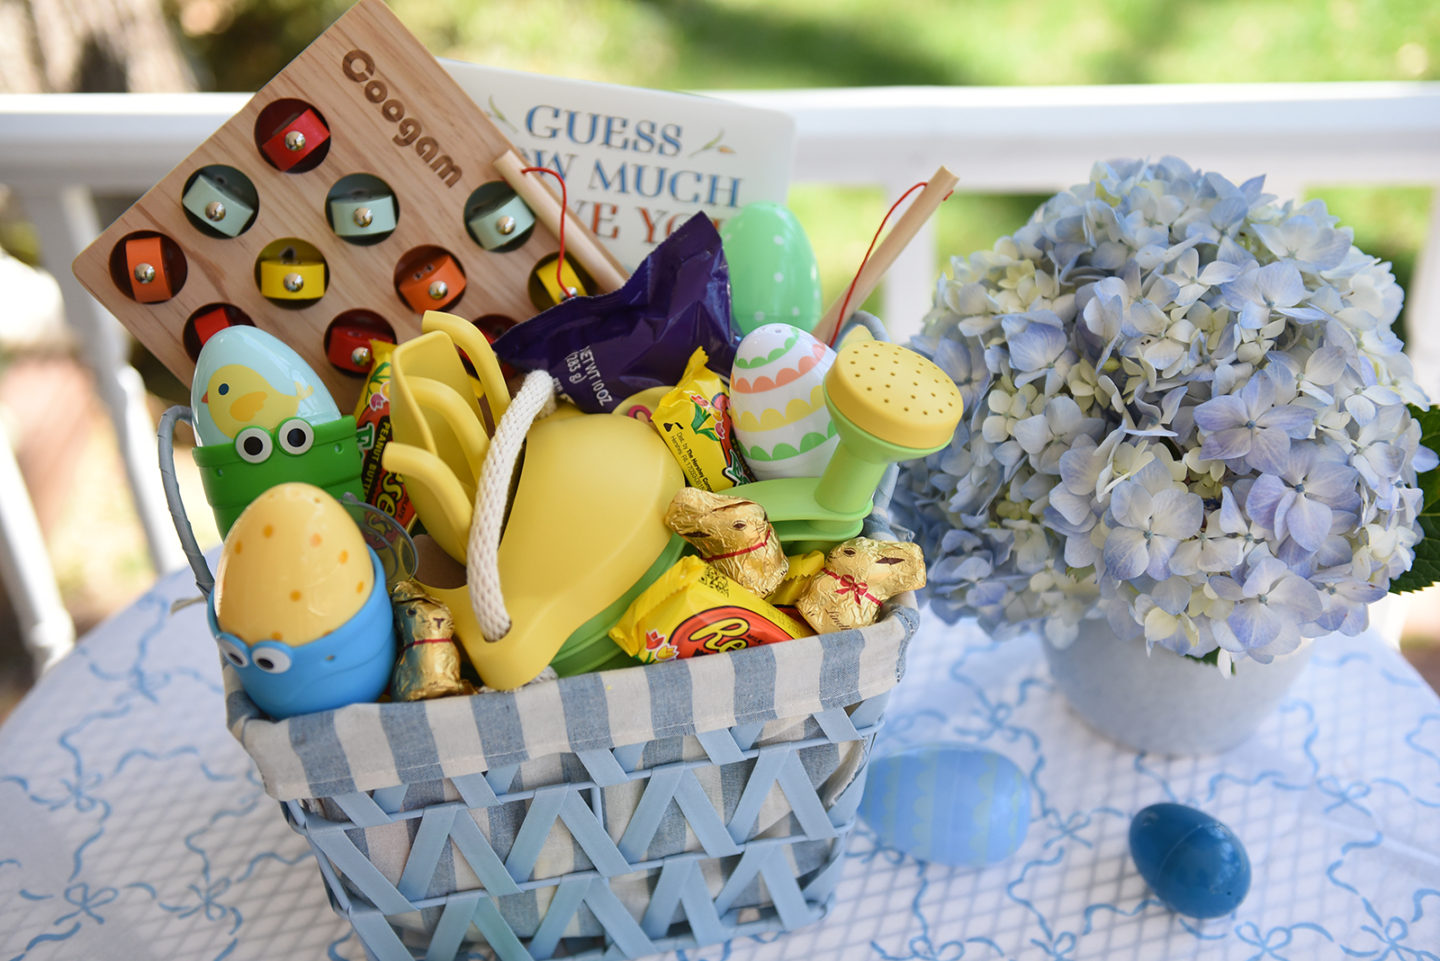 20 Edible Easter Basket Fillers - The Gracious Wife